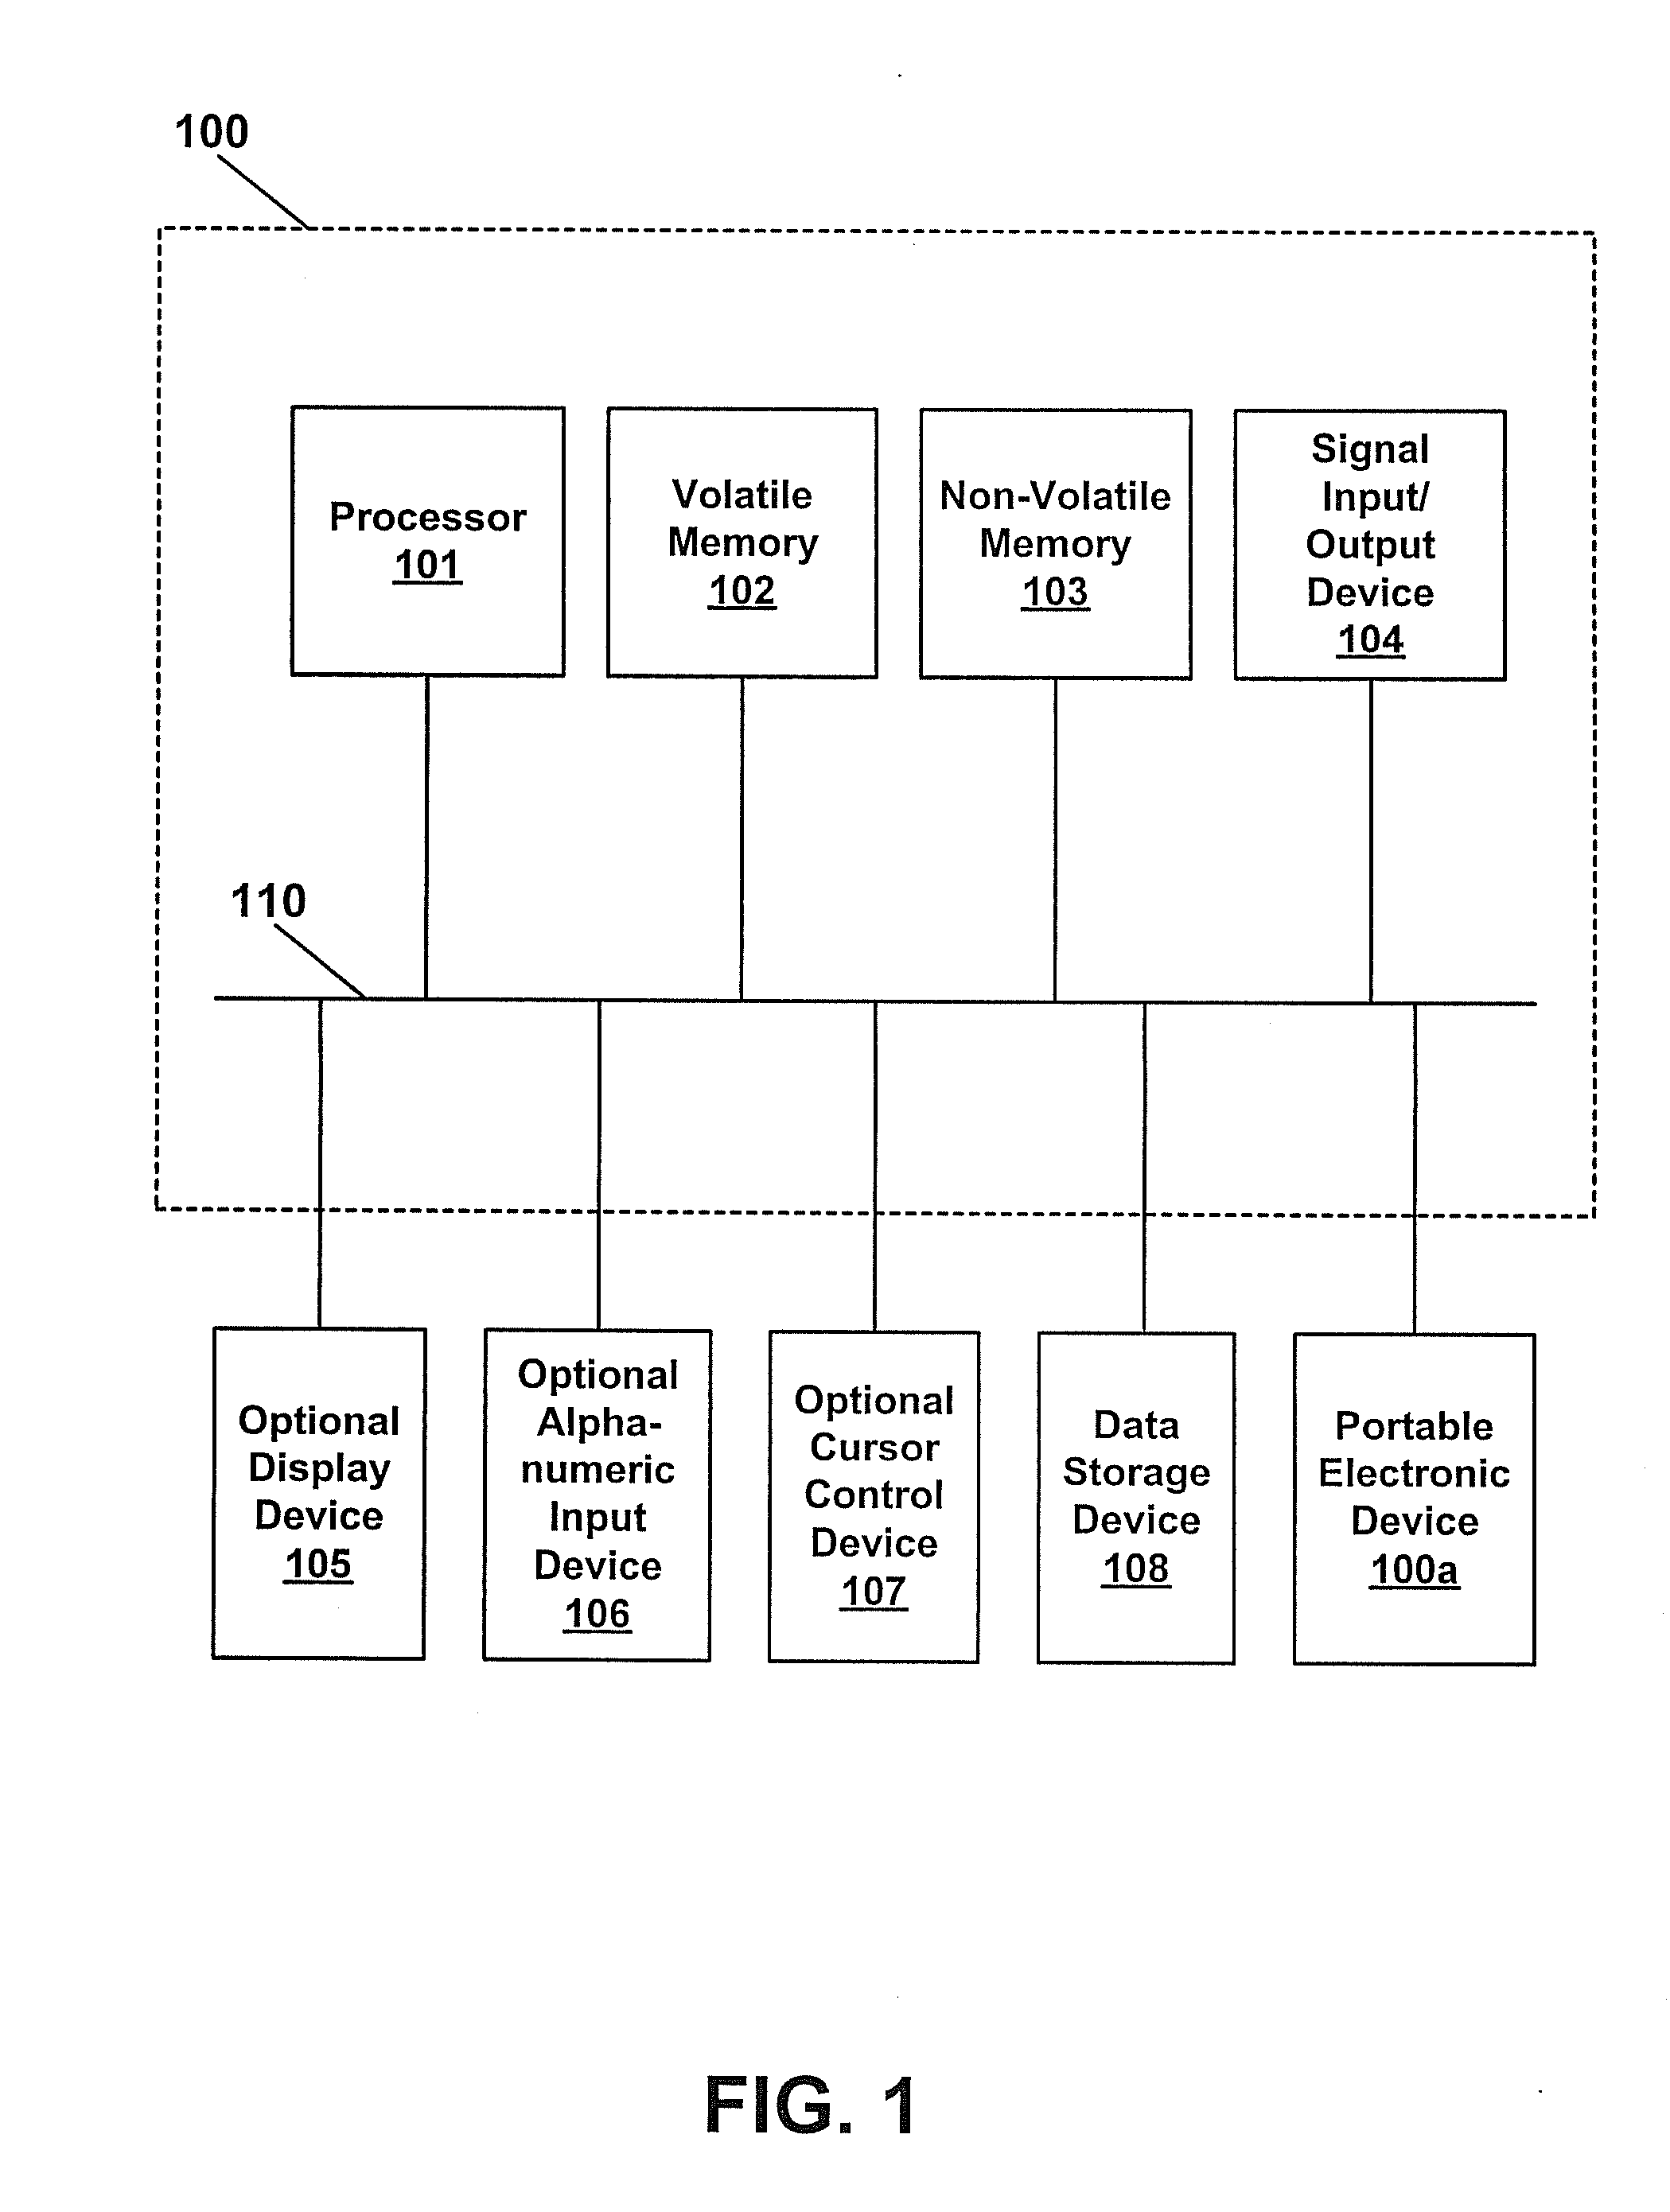 Method and system for controlled media sharing in a network